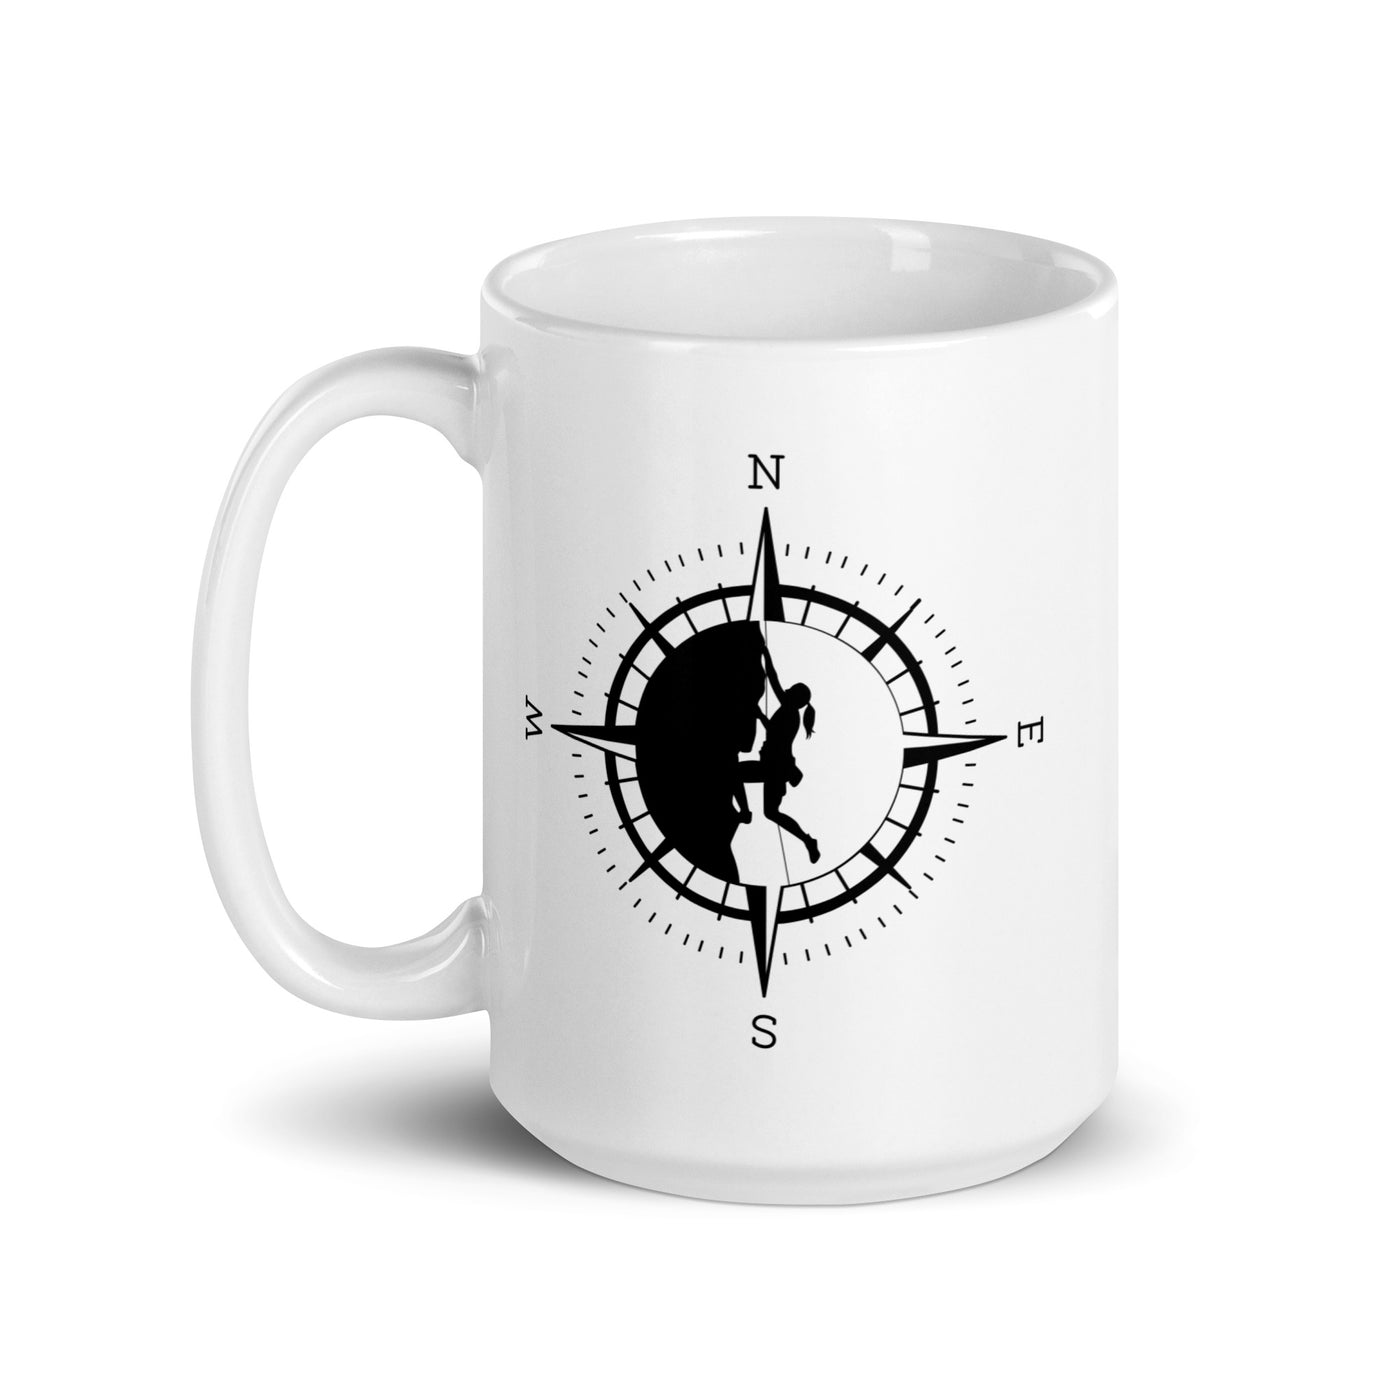 Compass And Climbing - Tasse klettern